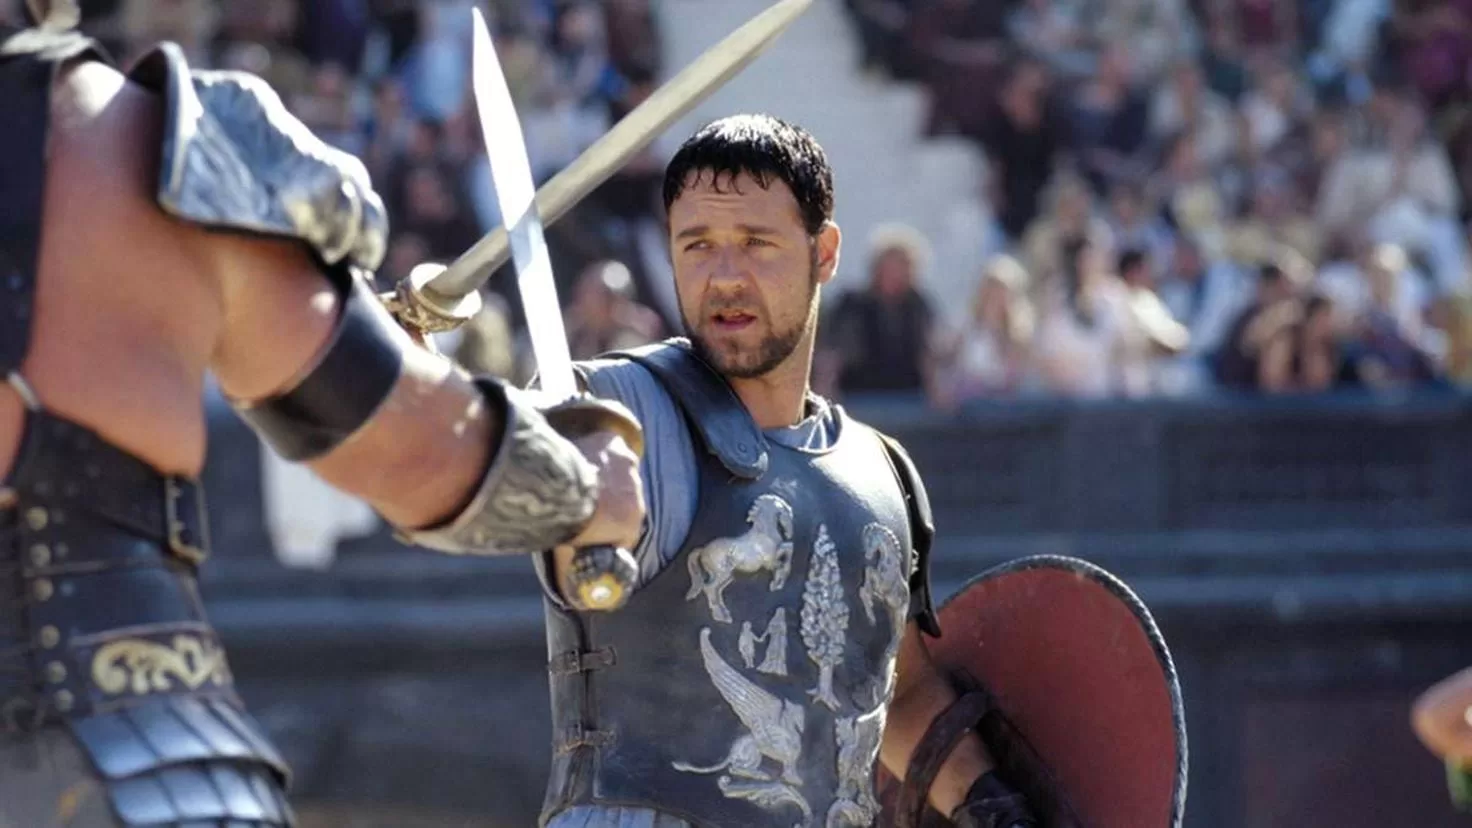 Russell Crowe, on Gladiator 2: They should pay me for the questions they ask me about it
